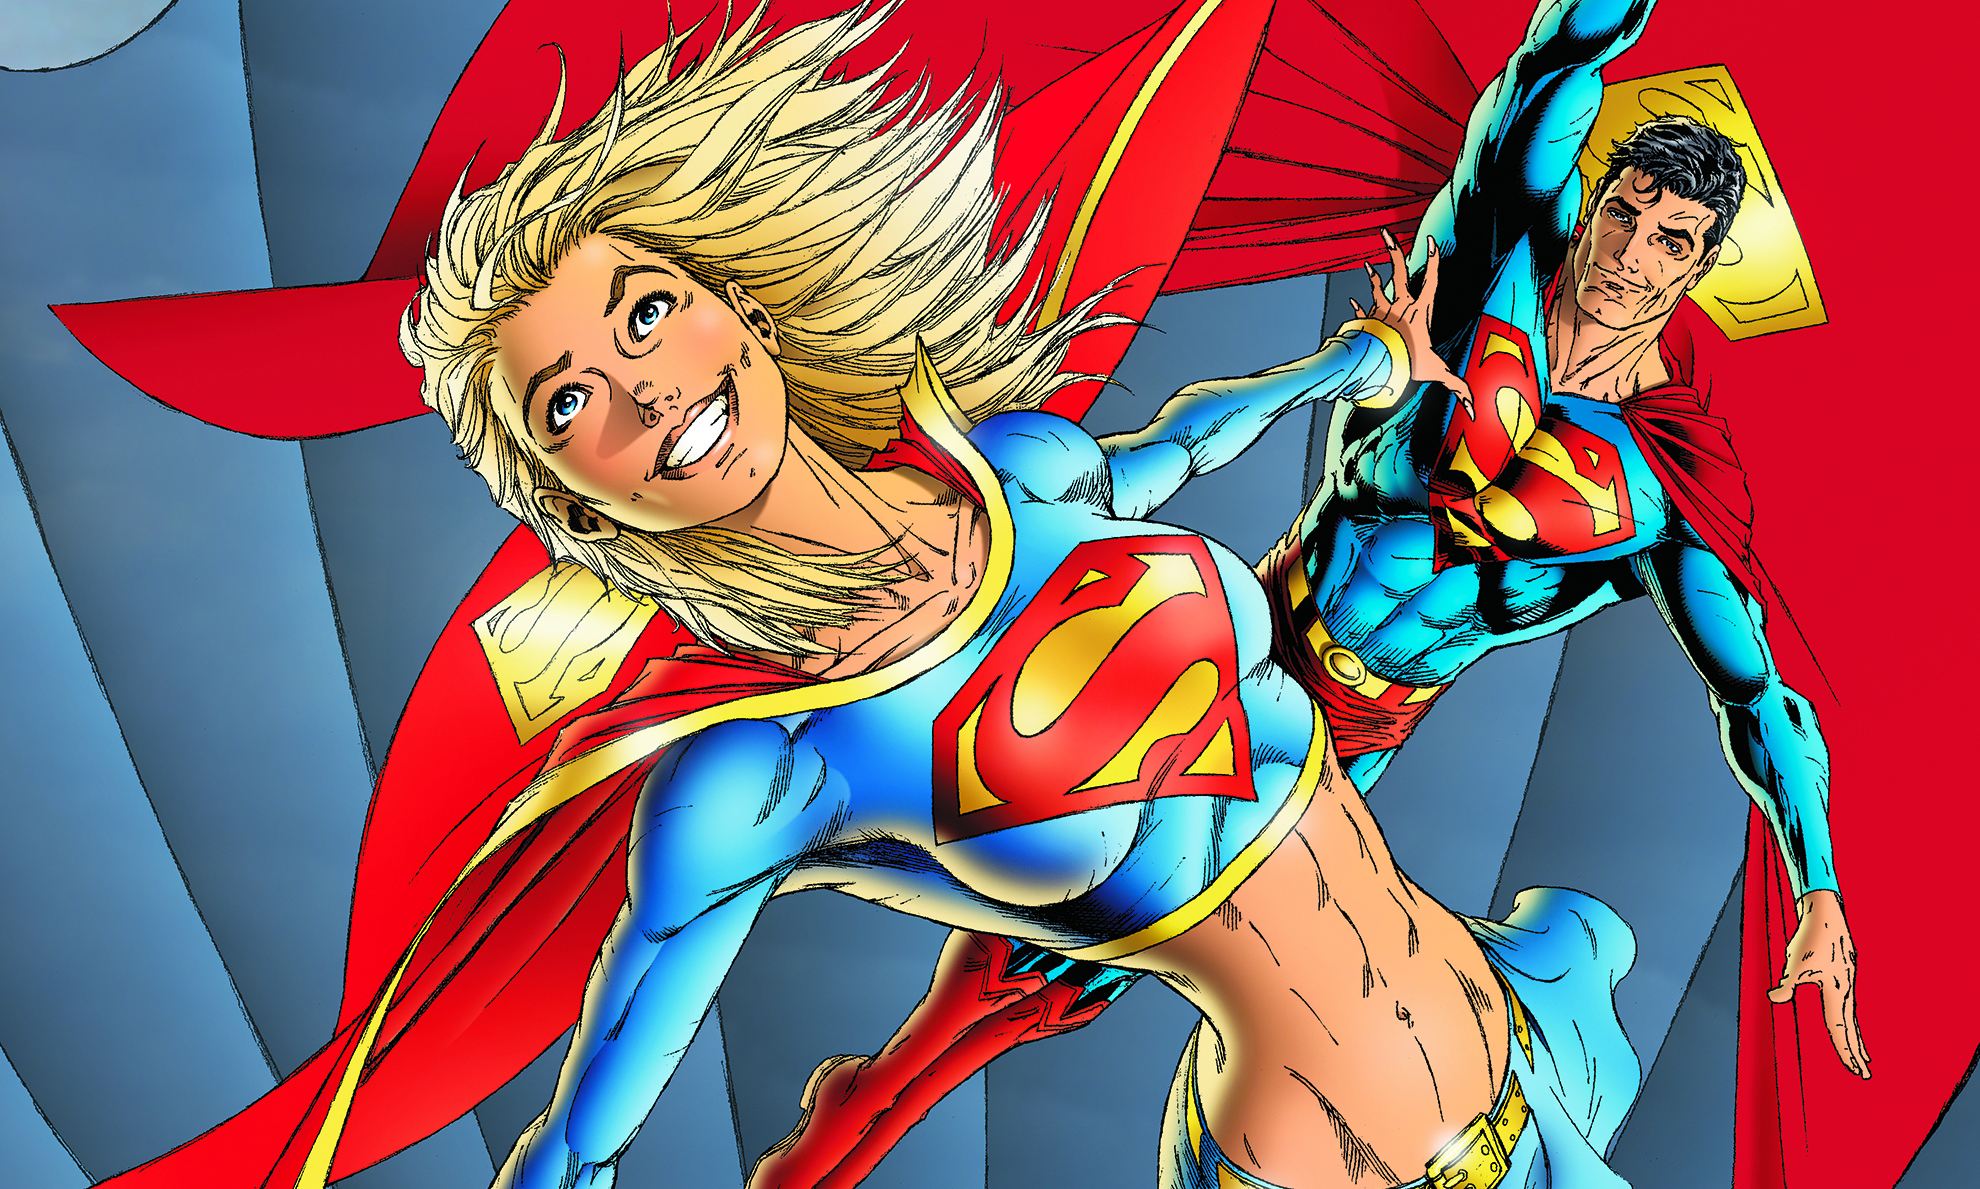 What Is The Difference Between Supergirl's And Superman's Powers